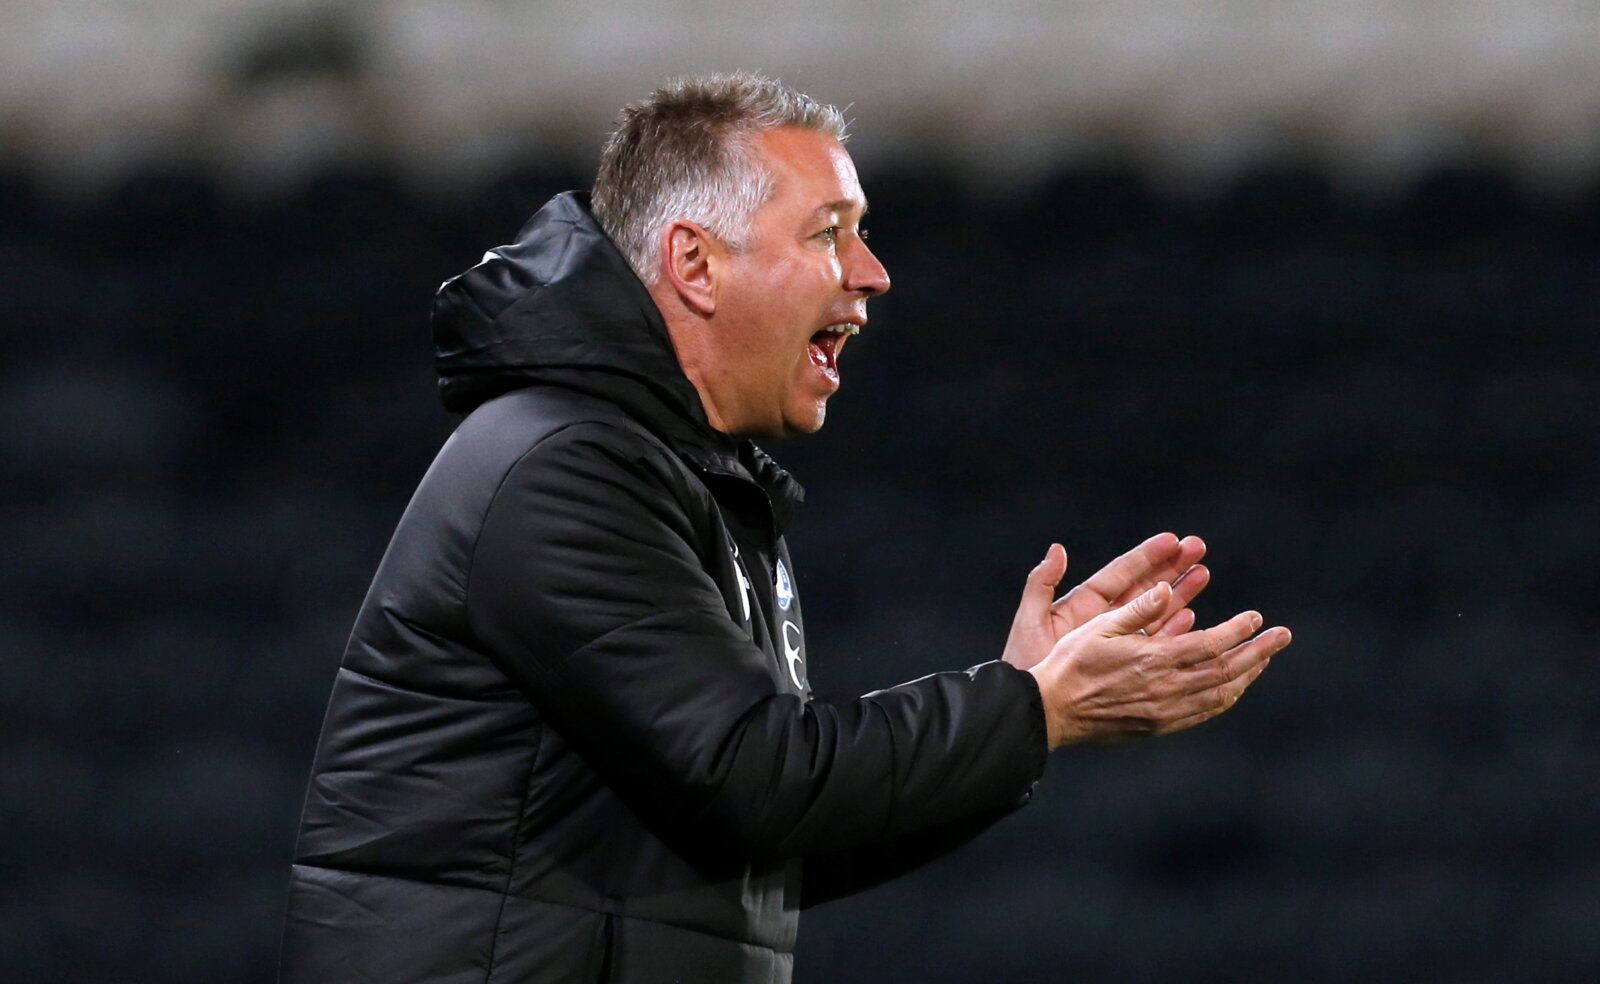 Soccer Football - Championship - Hull City v Peterborough United - KCOM Stadium, Hull, Britain - October 20, 2021  Peterborough United manager Darren Ferguson reacts  Action Images/Craig Brough  EDITORIAL USE ONLY. No use with unauthorized audio, video, data, fixture lists, club/league logos or 